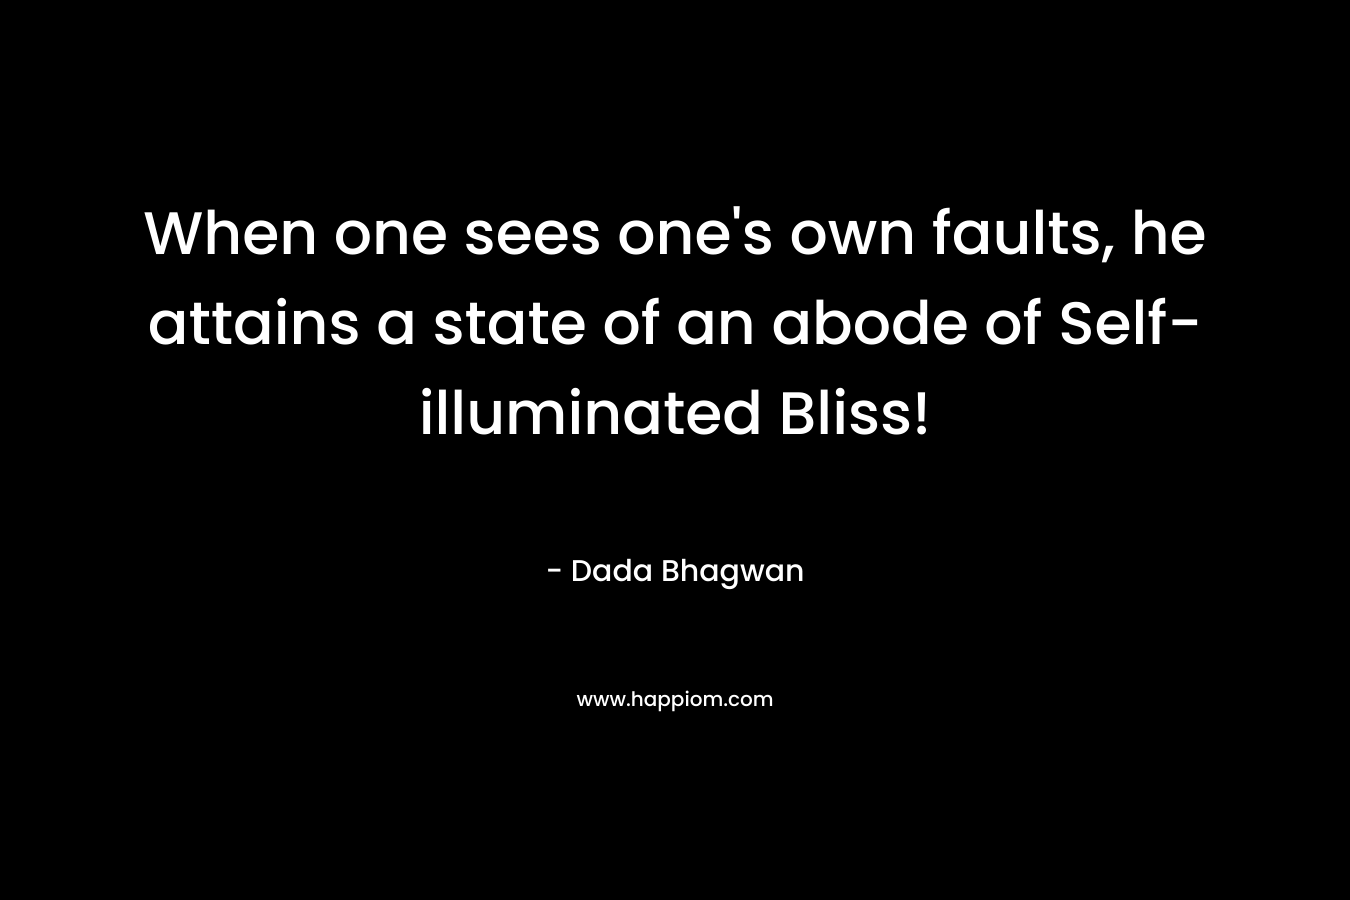 When one sees one's own faults, he attains a state of an abode of Self-illuminated Bliss!